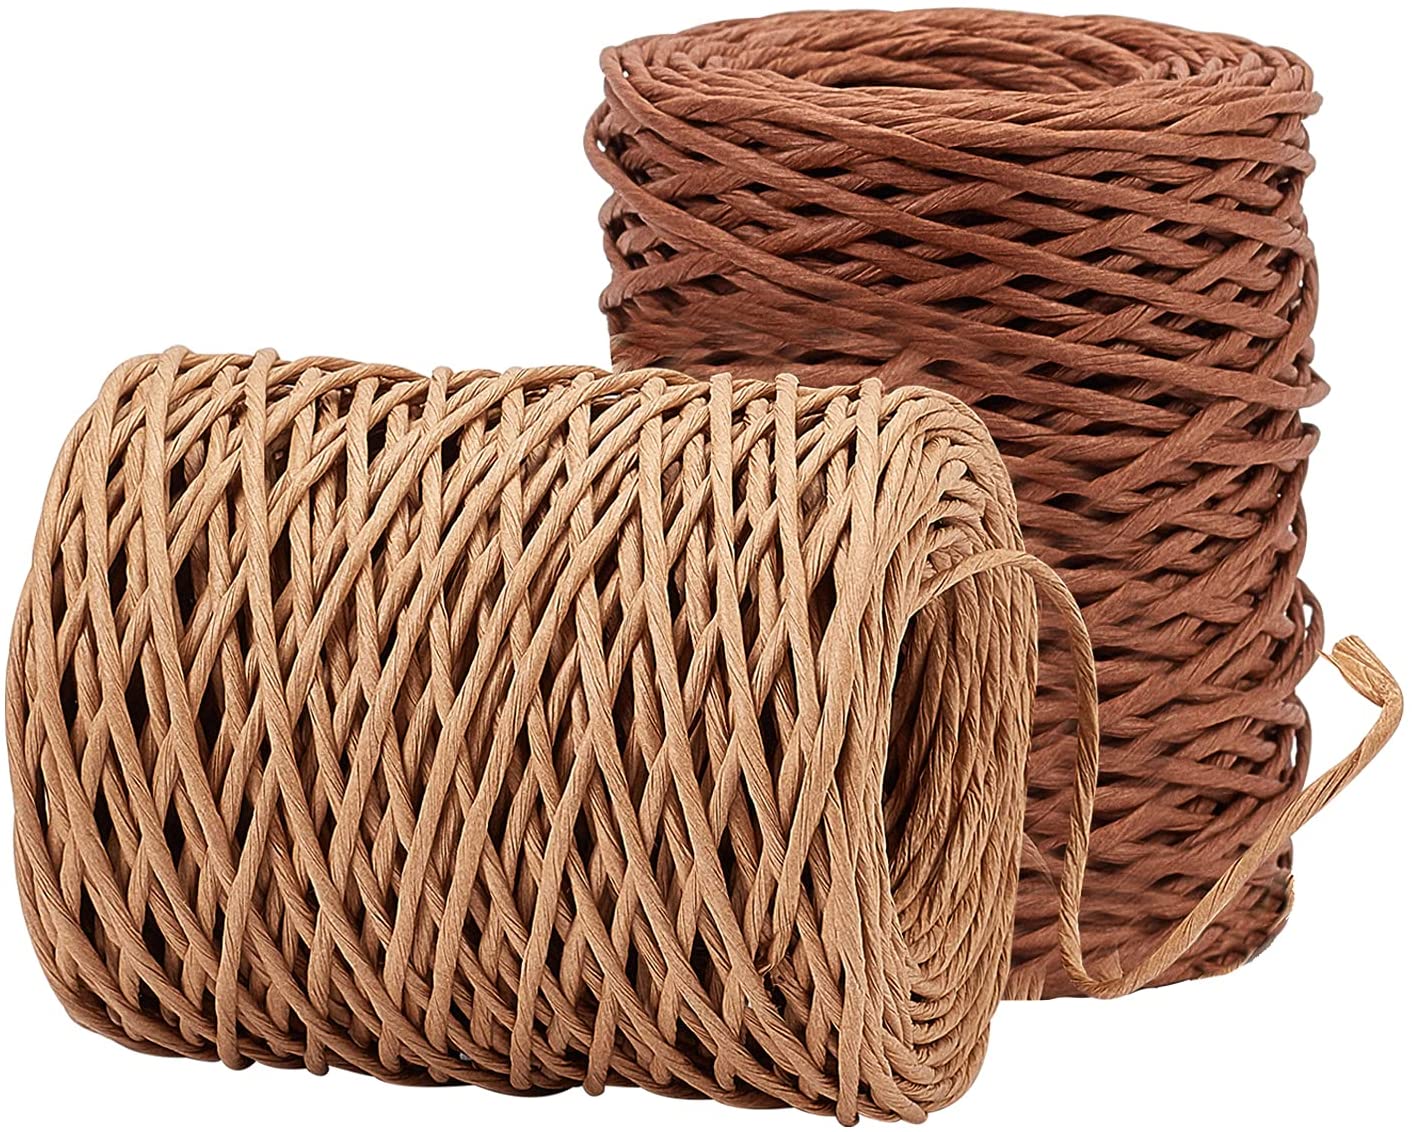 PandaHall Elite 1 Roll Brown Floral Bind Wire Wrap Twine 12 Guage Paper Covered Rustic Vine 164 Feet for Art Craft Flower Bouquets